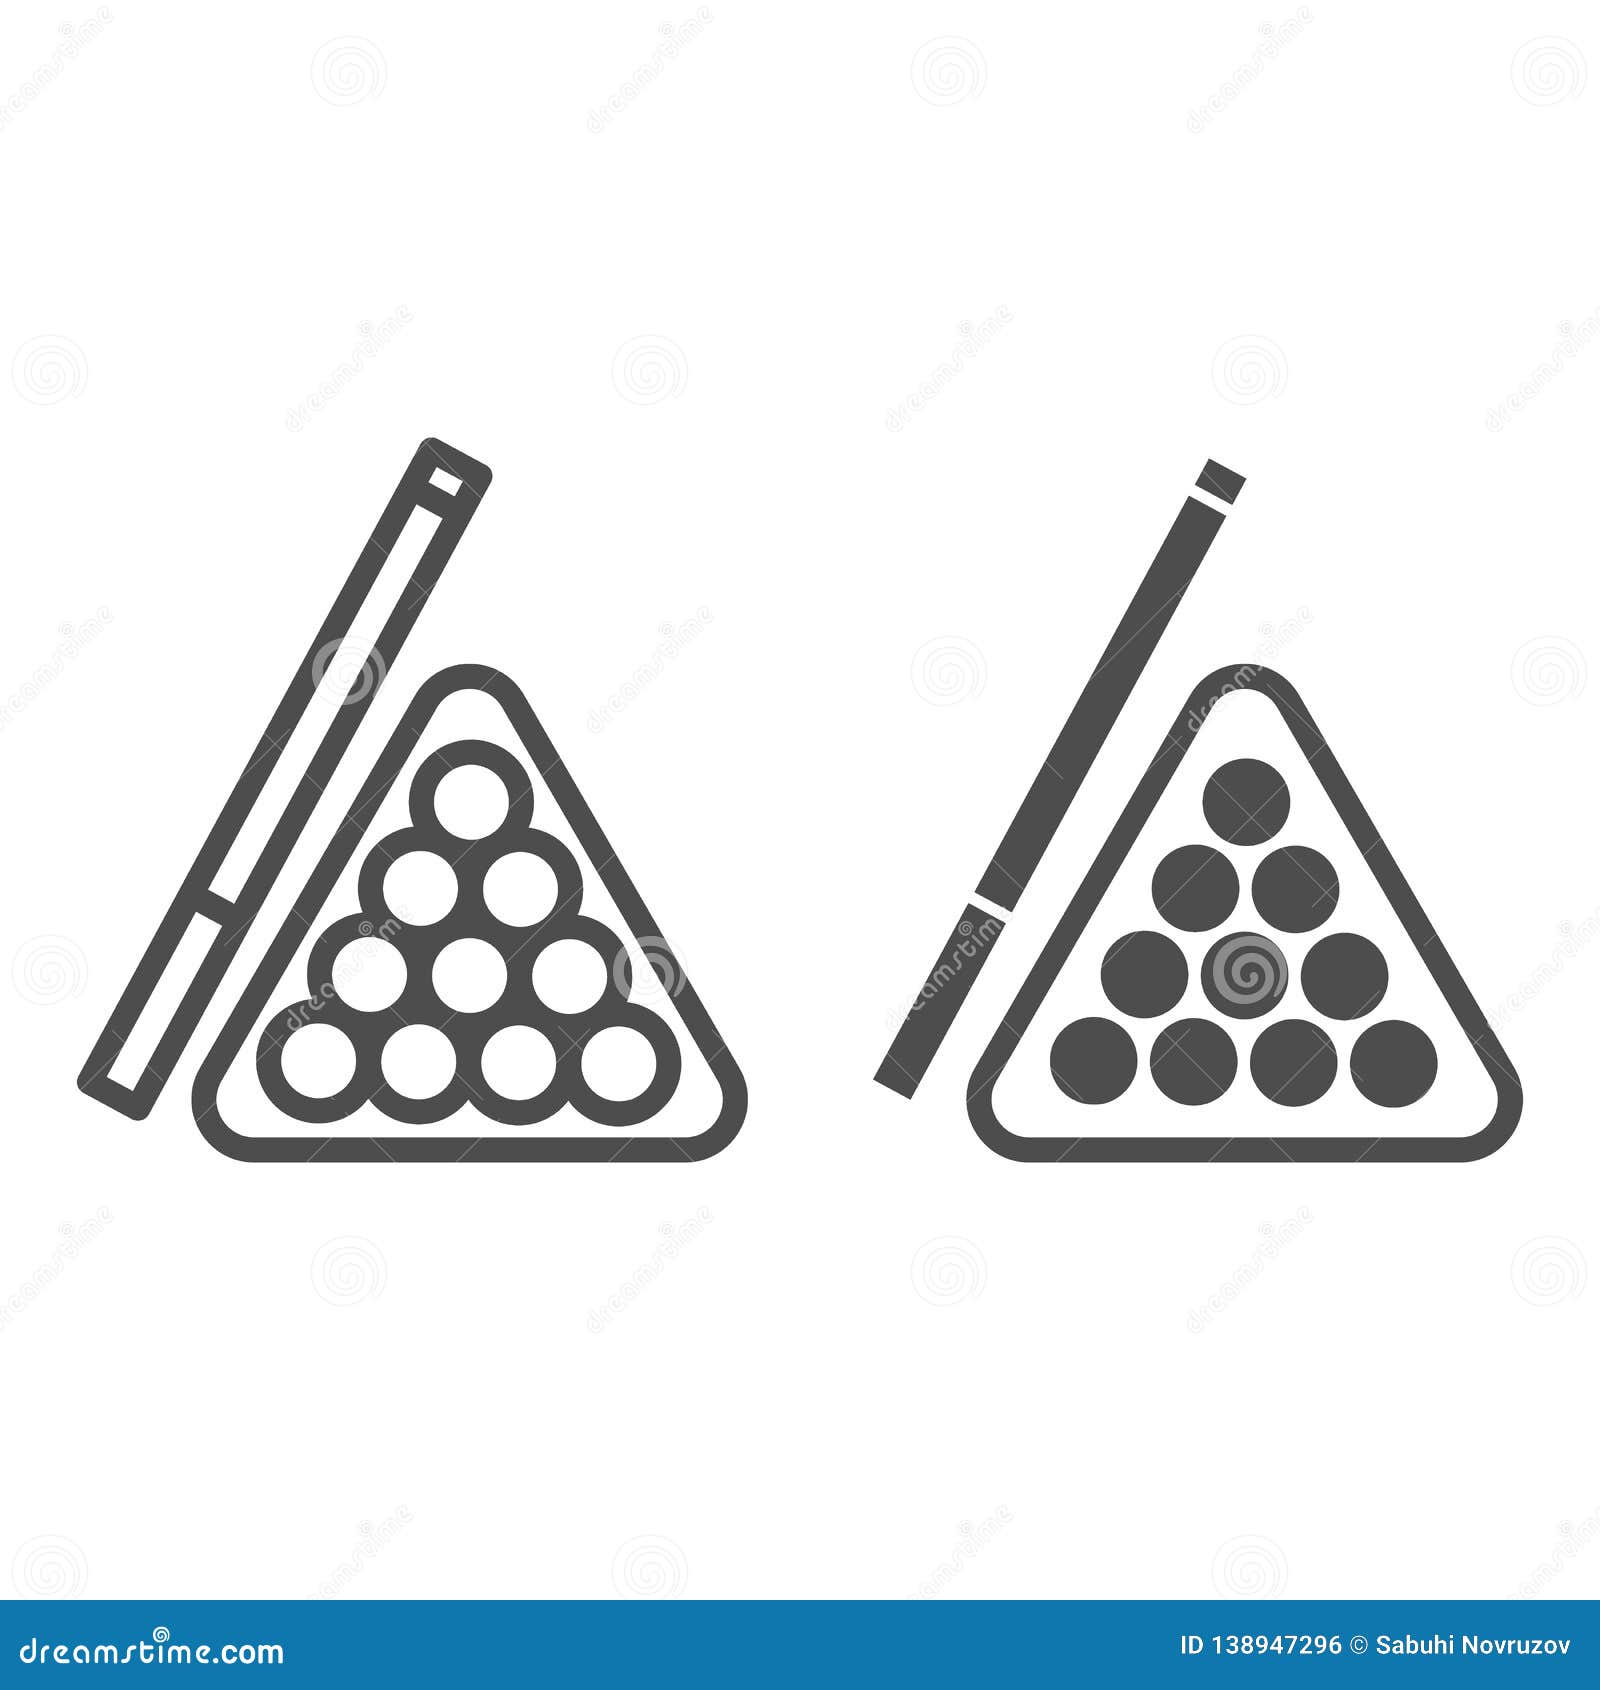 Billiards Line and Glyph Icon. Pool Cue and Balls Vector Illustration  Isolated on White Stock Vector - Illustration of equipment, angle: 138947296